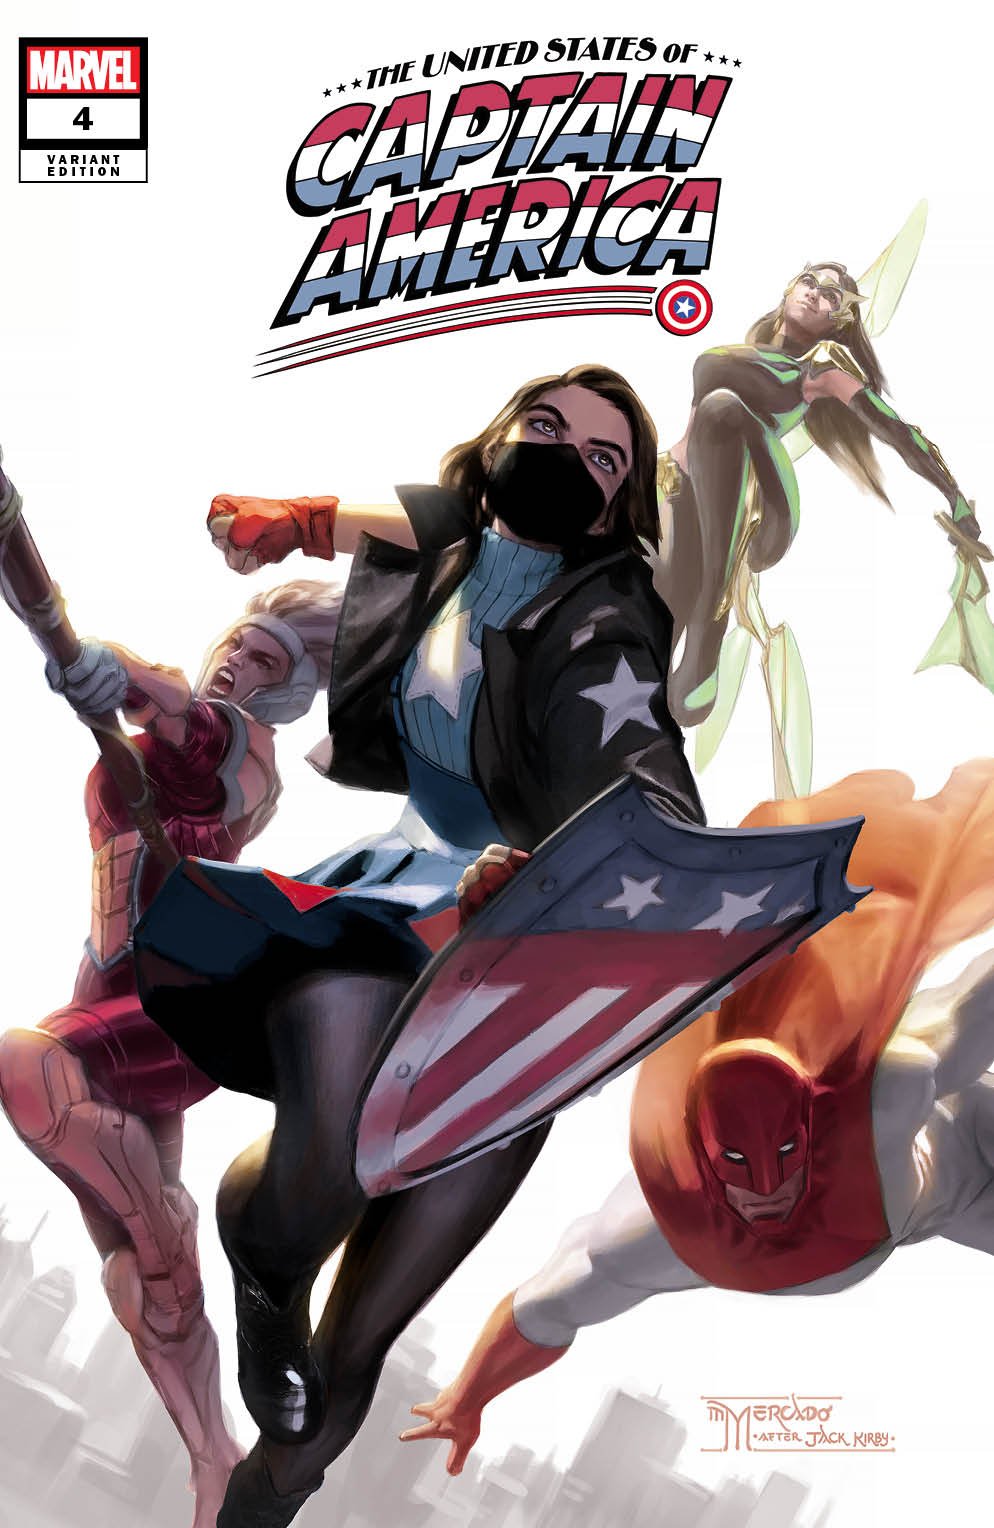 09/22/2021 UNITED STATES CAPTAIN AMERICA #4 MIGUEL MERCADO EXCLUSIVE FIRST APPEARANCE OF ARIELLE AGBAYANI